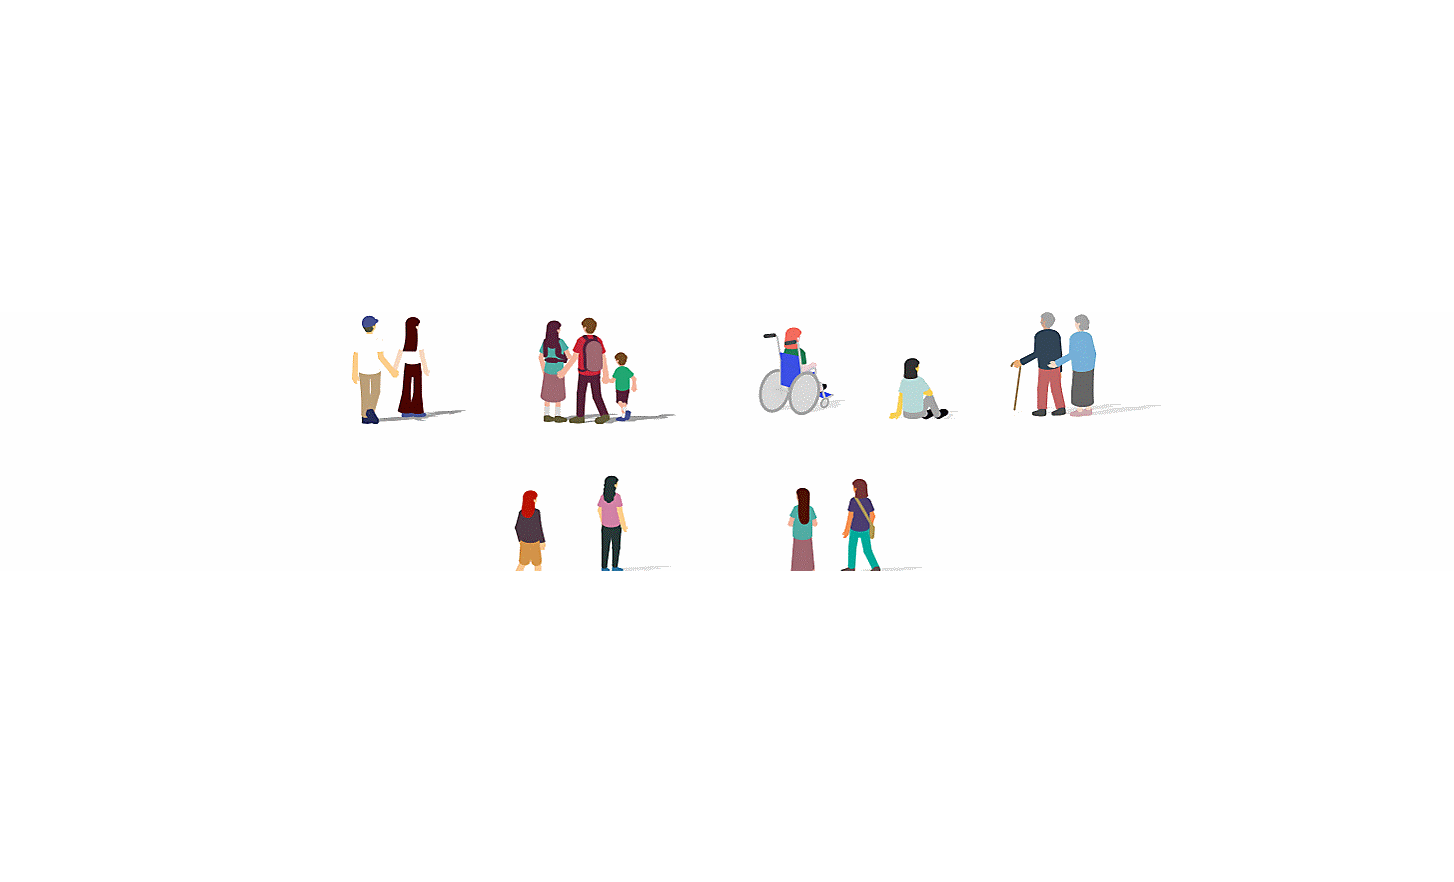 Illustration of people of various races, ages etc.